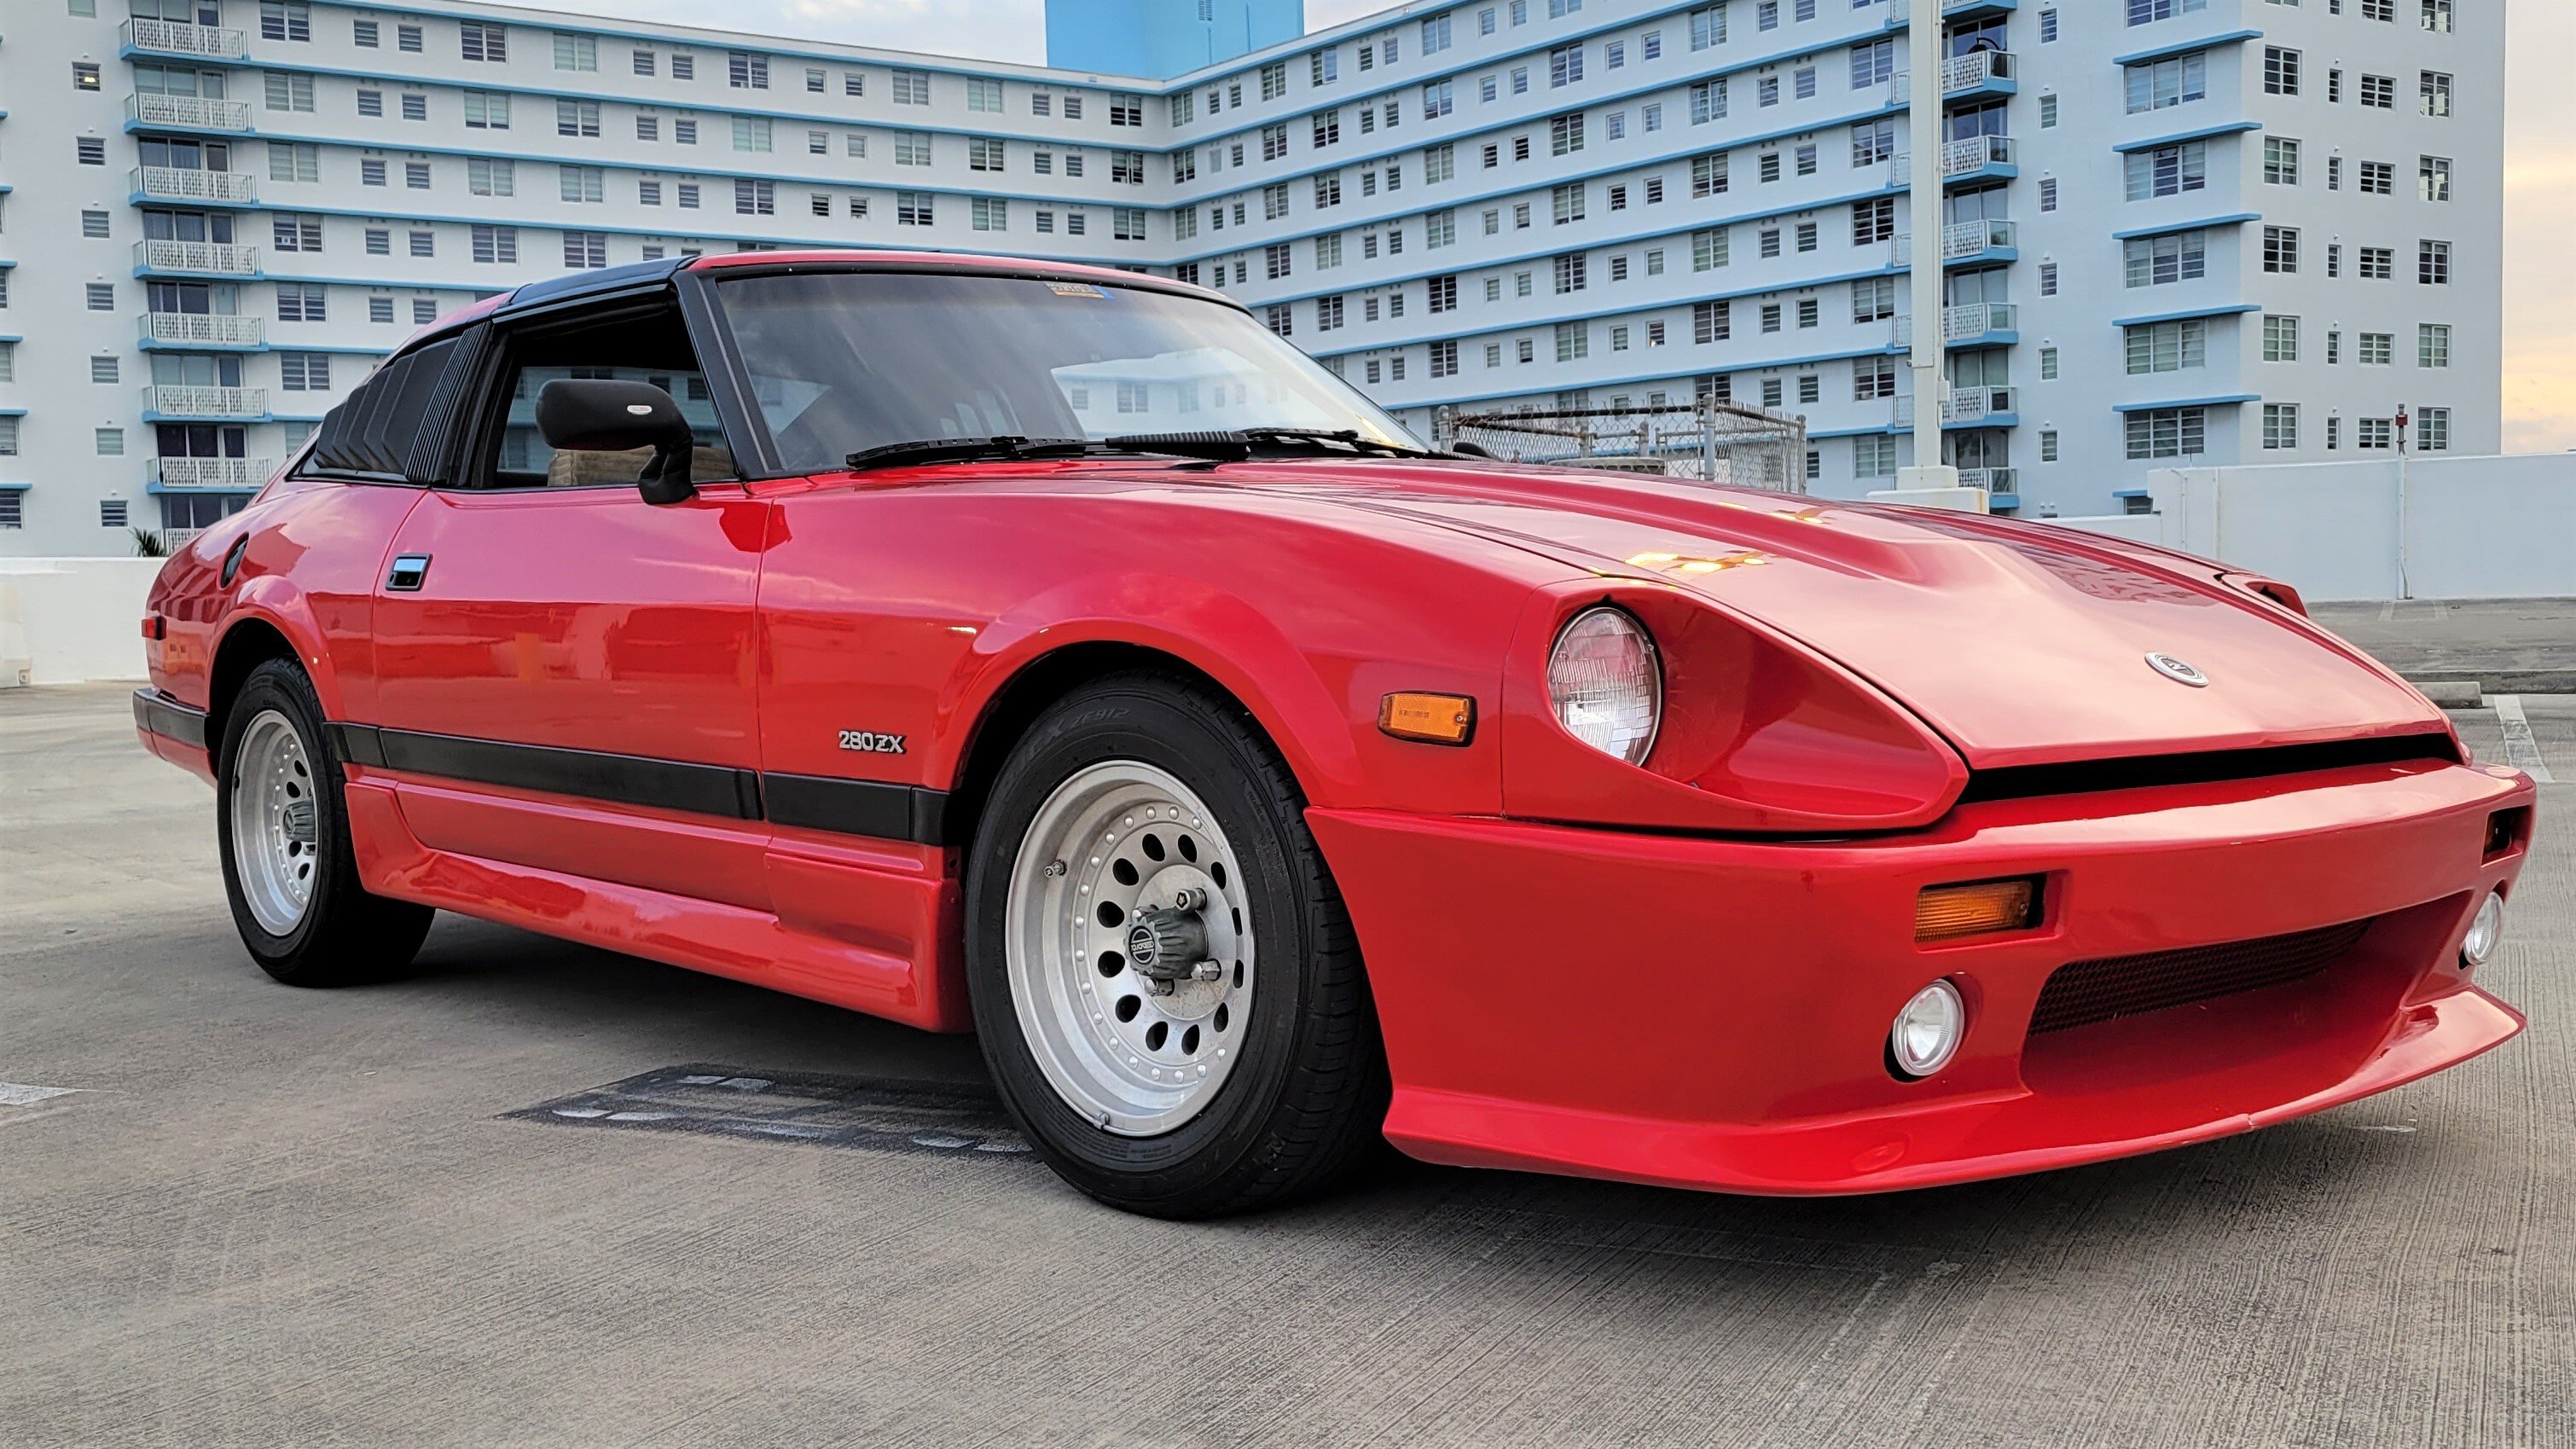 1983 Datsun 280ZX Classic Cars for Sale - Classics on Autotrader